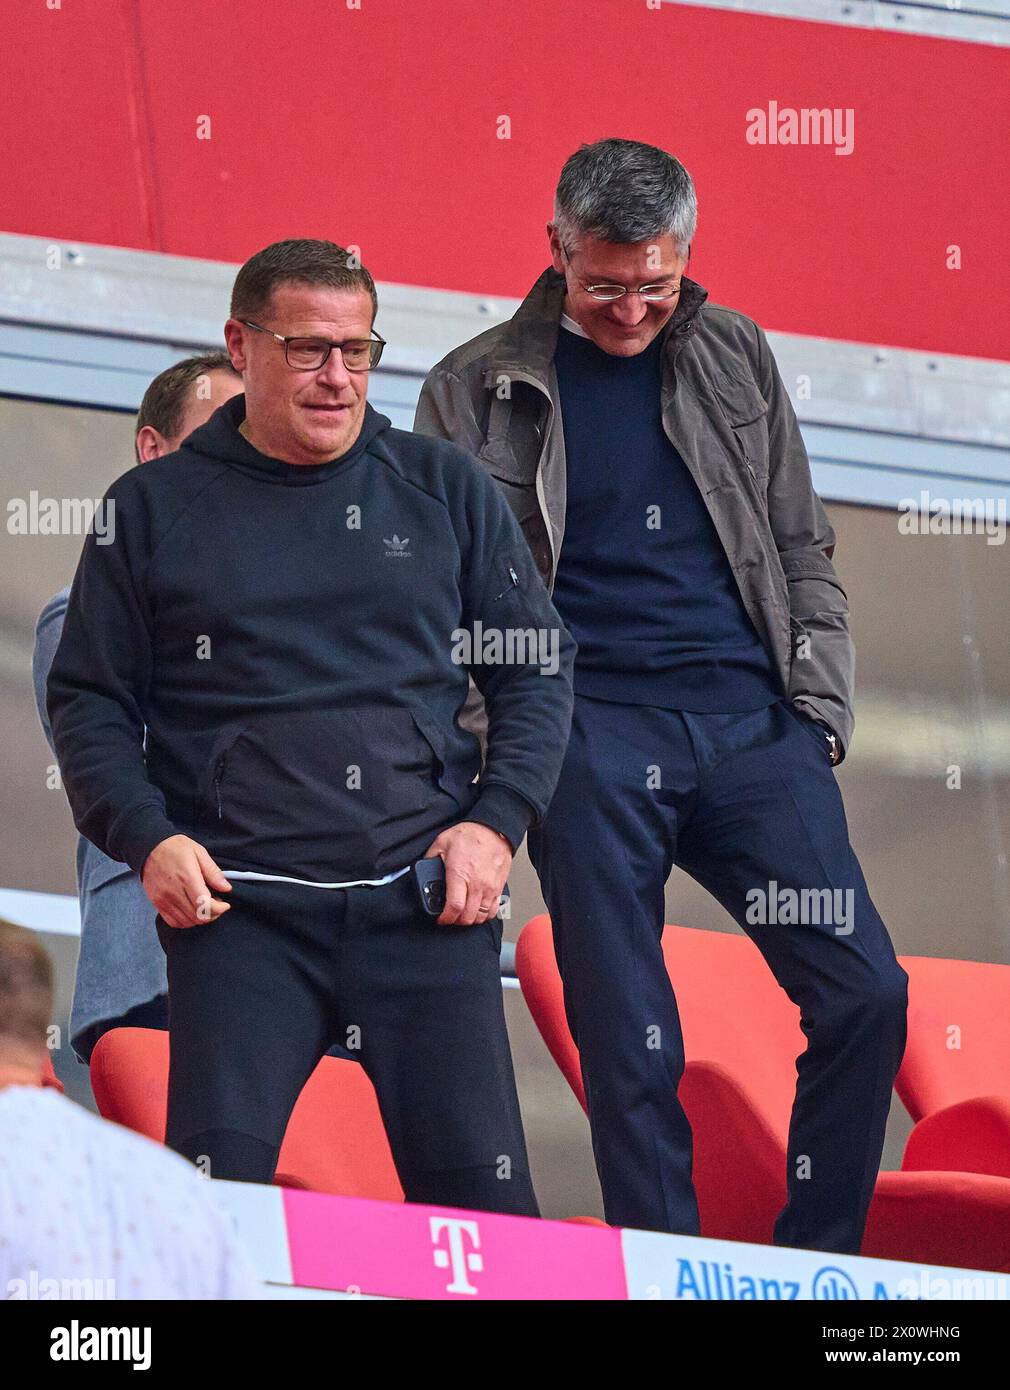 Max Eberl  (L), Sportvorstand und Manager FC Bayern, Herbert HAINER, FCB president and Ex CEO Adidas   in the match  FC BAYERN MUENCHEN - 1.FC KOeLN 2-0   on April 13, 2024 in Munich, Germany. Season 2023/2024, 1.Bundesliga, FCB,, Muenchen, matchday 29, 29.Spieltag Photographer: ddp images / star-images    - DFL REGULATIONS PROHIBIT ANY USE OF PHOTOGRAPHS as IMAGE SEQUENCES and/or QUASI-VIDEO - Stock Photo